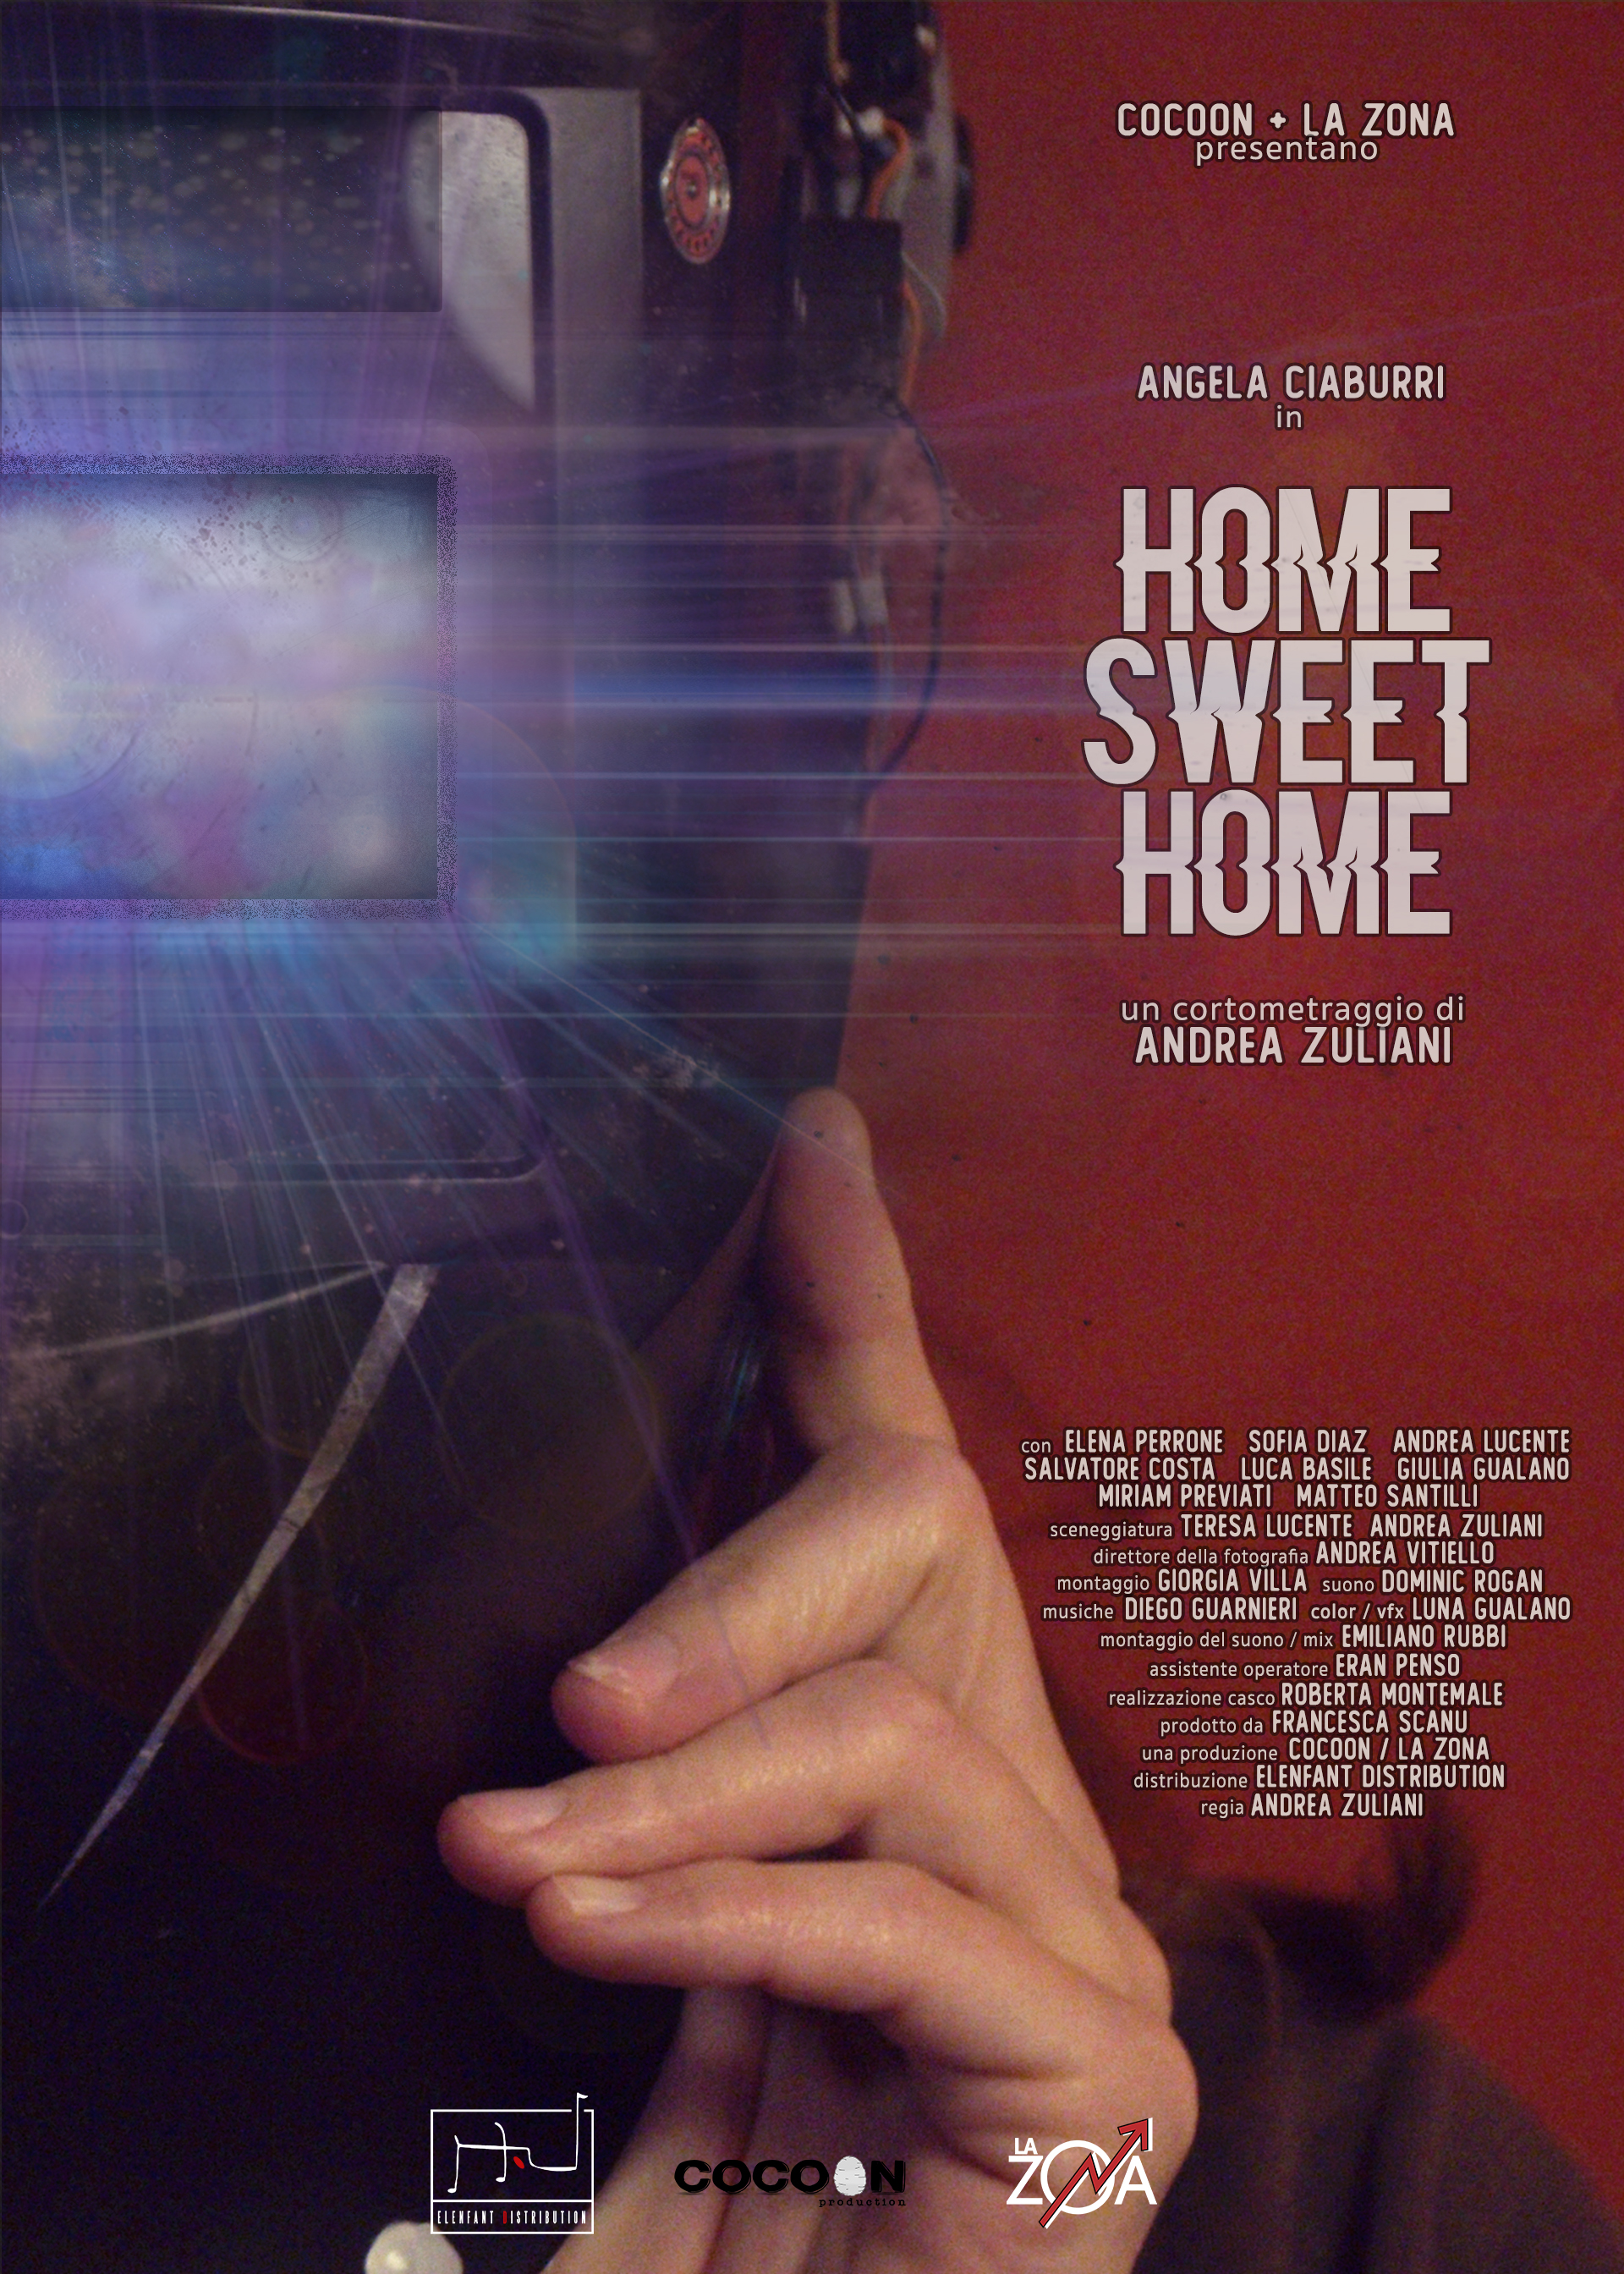 Home Sweet Home<h3 style="font-size:10px; line-height:20px;"> di Andrea Zuliani</h3>